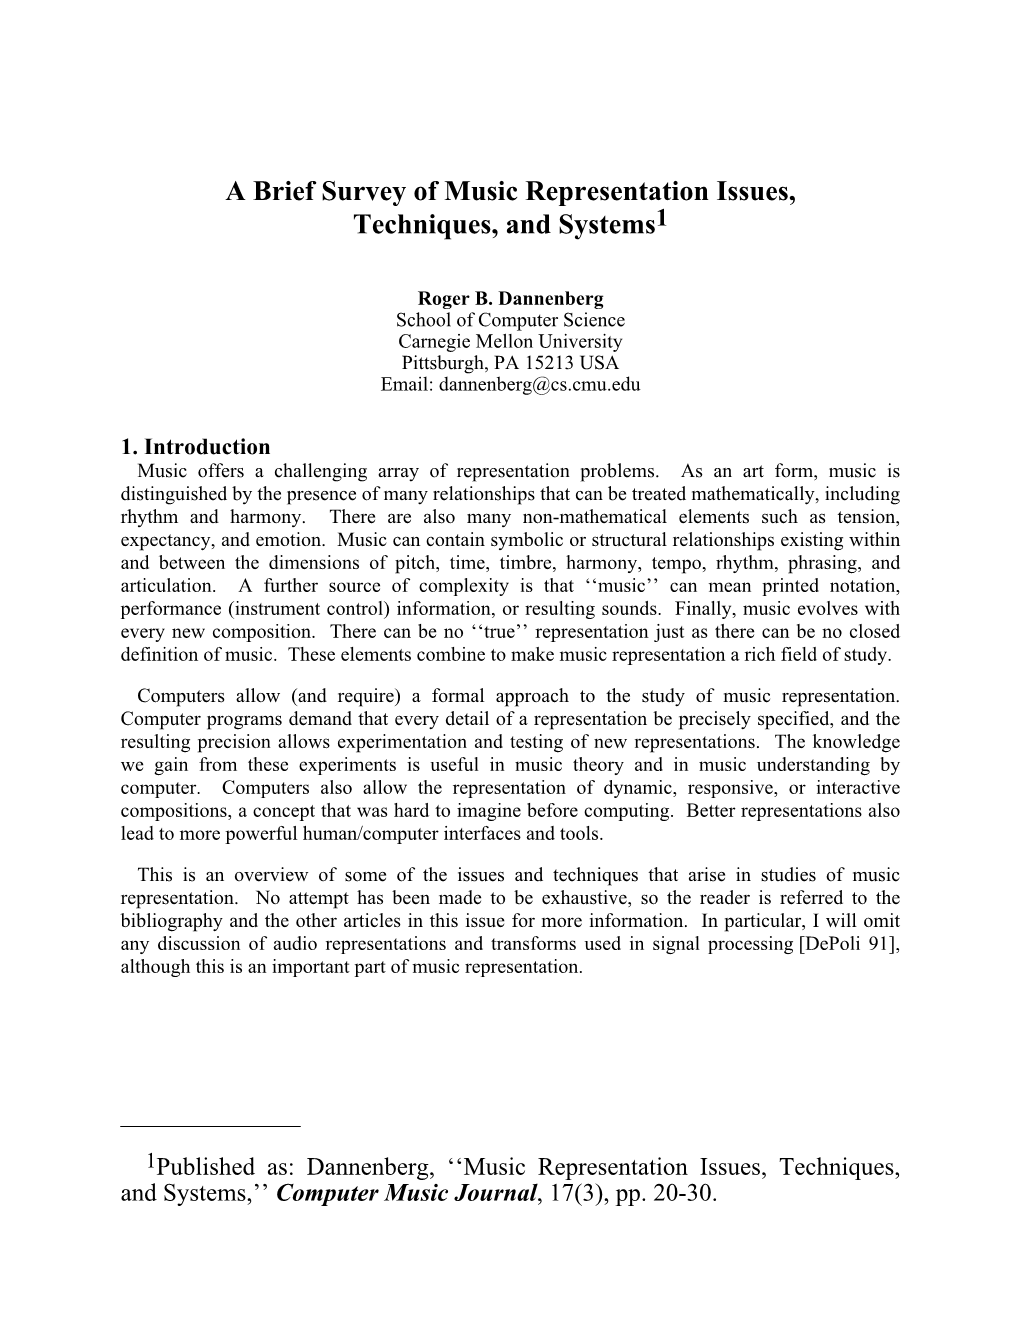 Music Representation Issues, Techniques, and Systems1